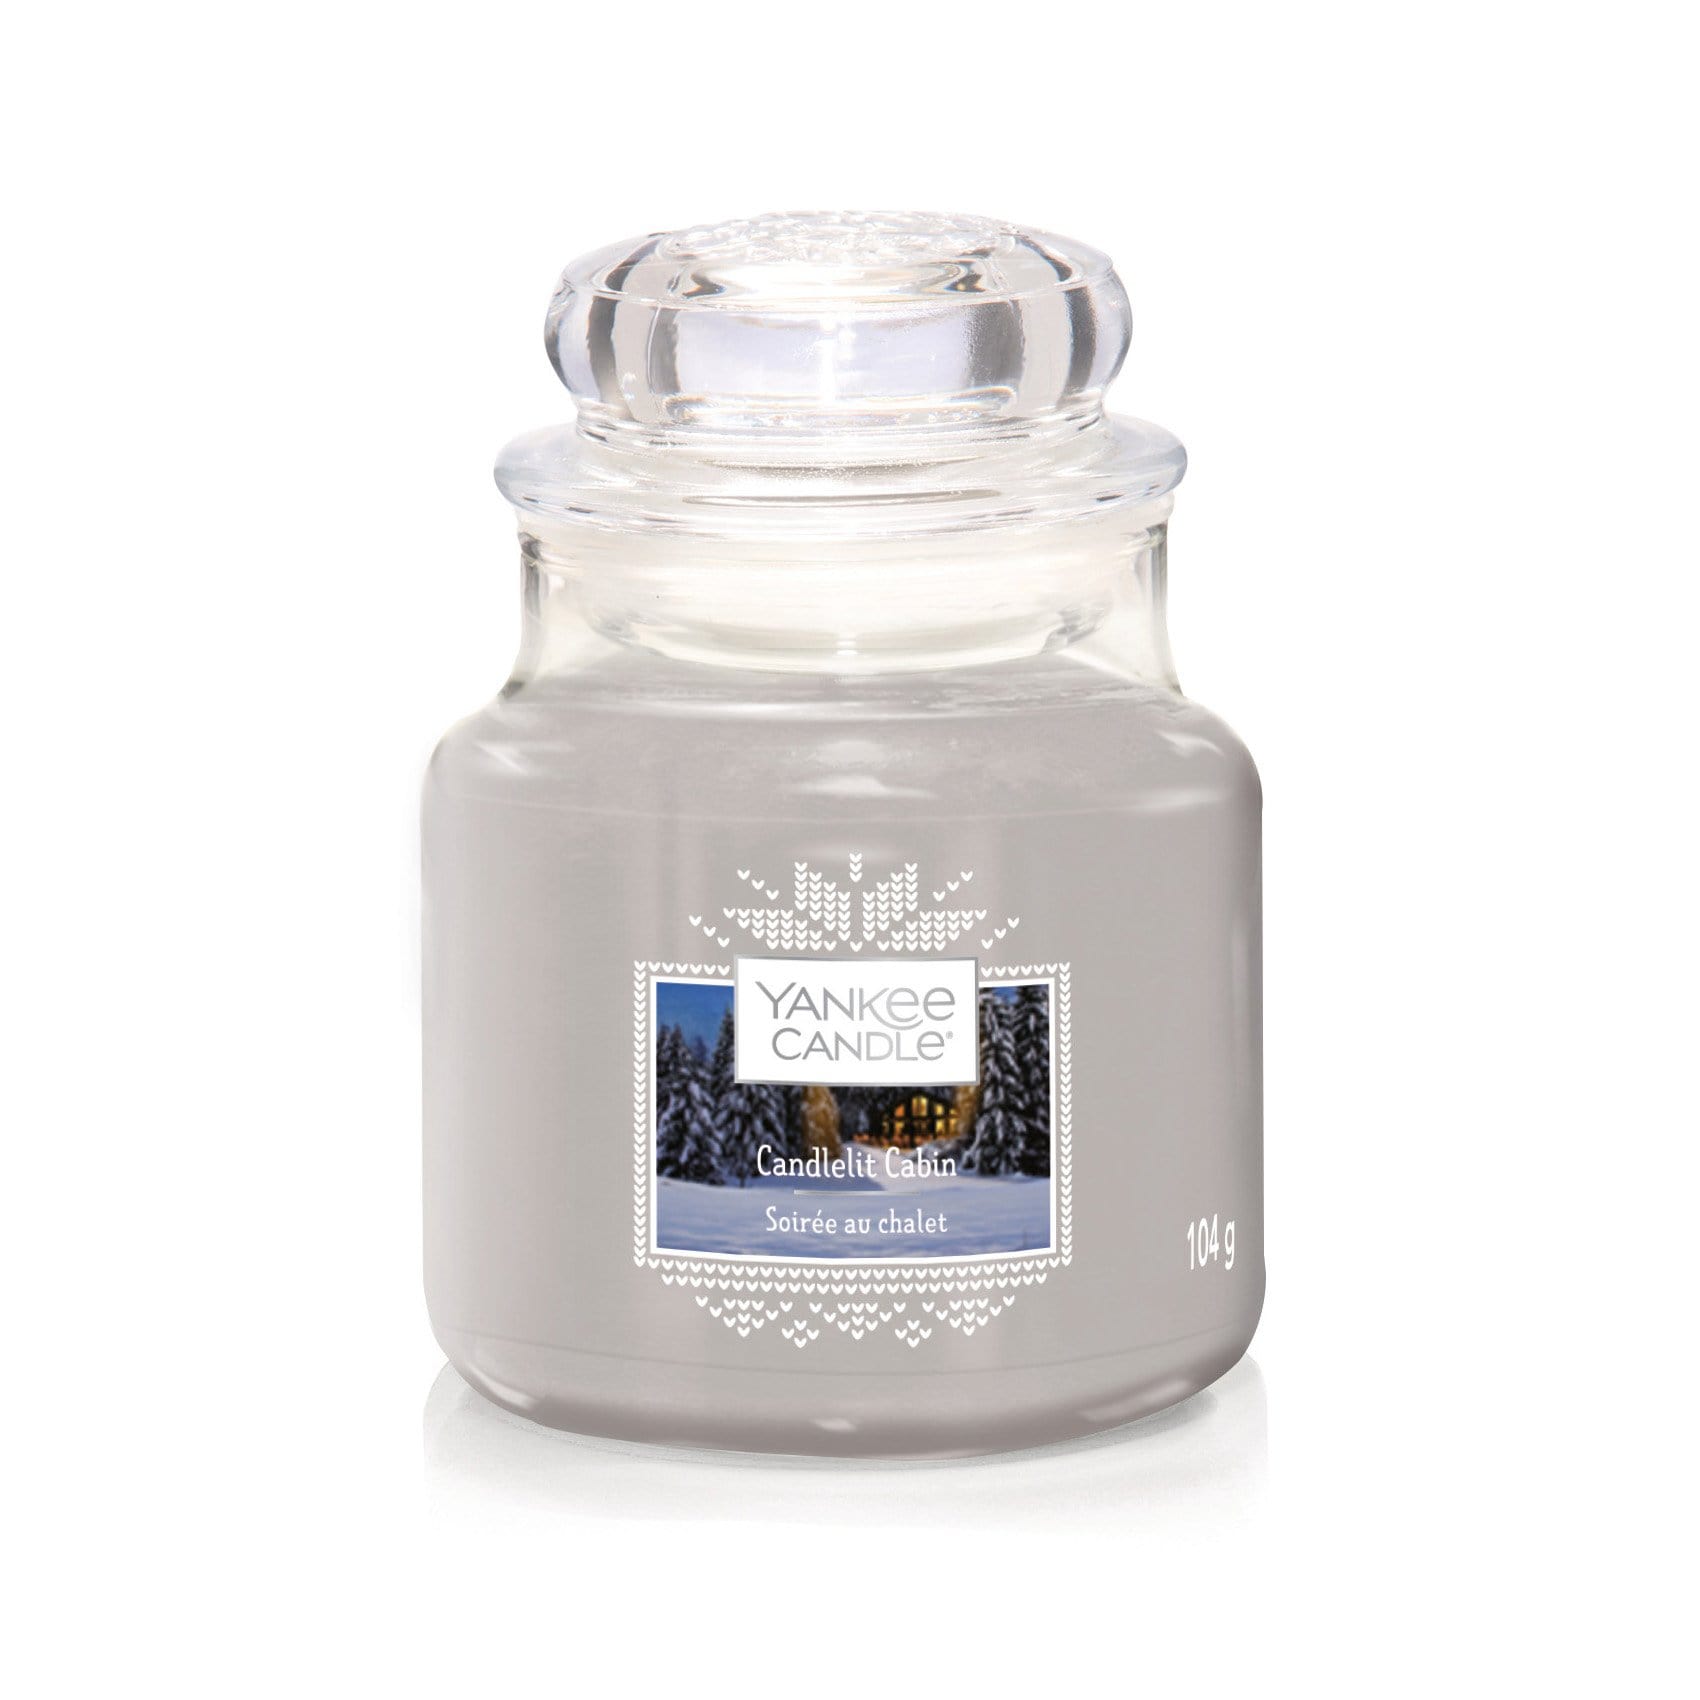 Yankee Candle Small Jar Candle Yankee Candle Small Jar -  Candlelit Cabin